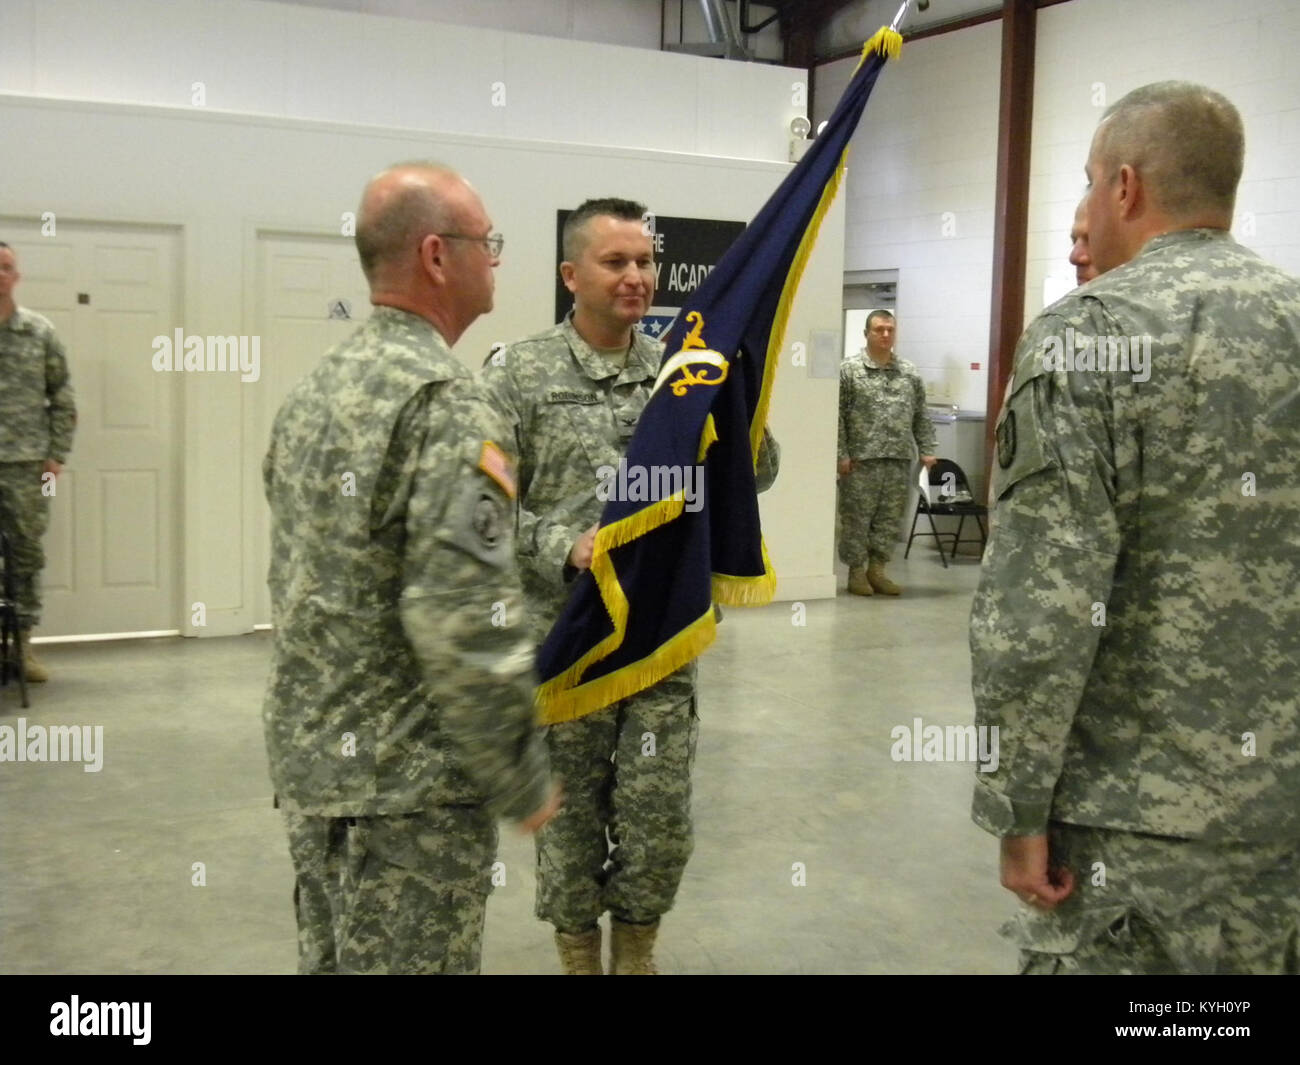 The 238th welcomed Col. William A. Denny as their newest commander at a change of command ceremony at Wendell H. Ford Regional Center in Greenville, Ky., Dec. 3. Stock Photo